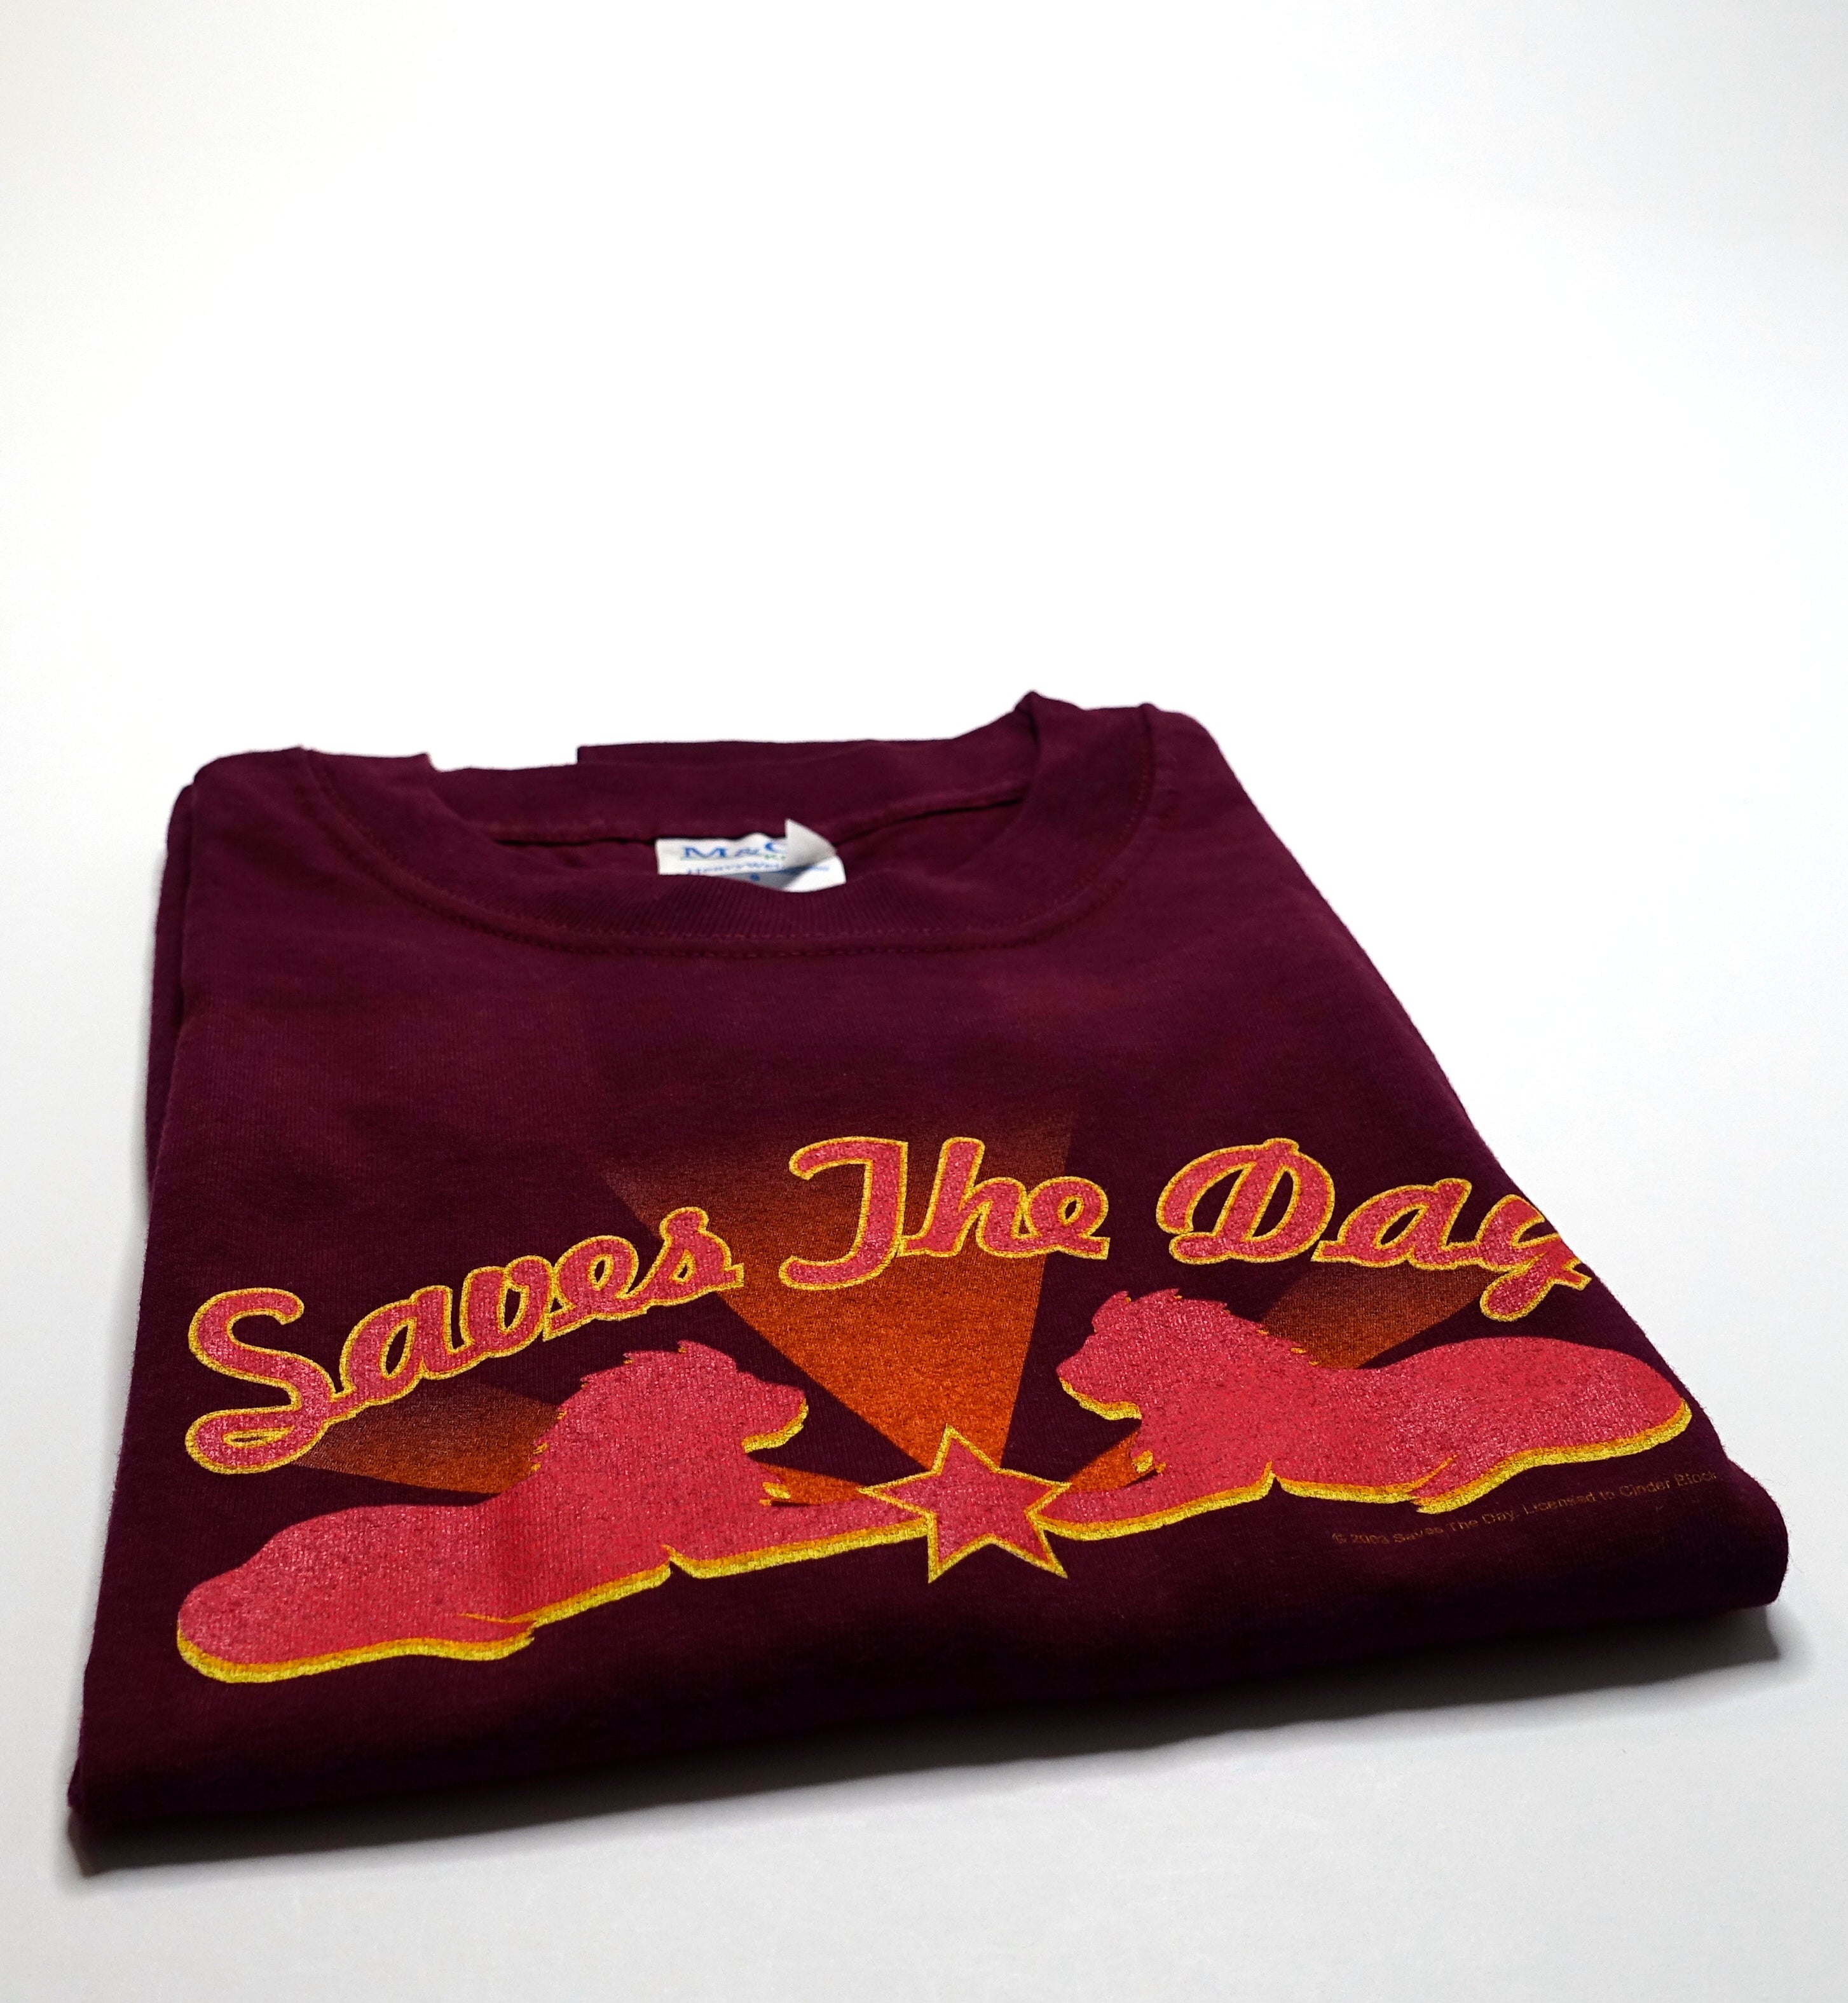 Saves The Day - In Reverie Lions 2003 Tour Shirt Size Large